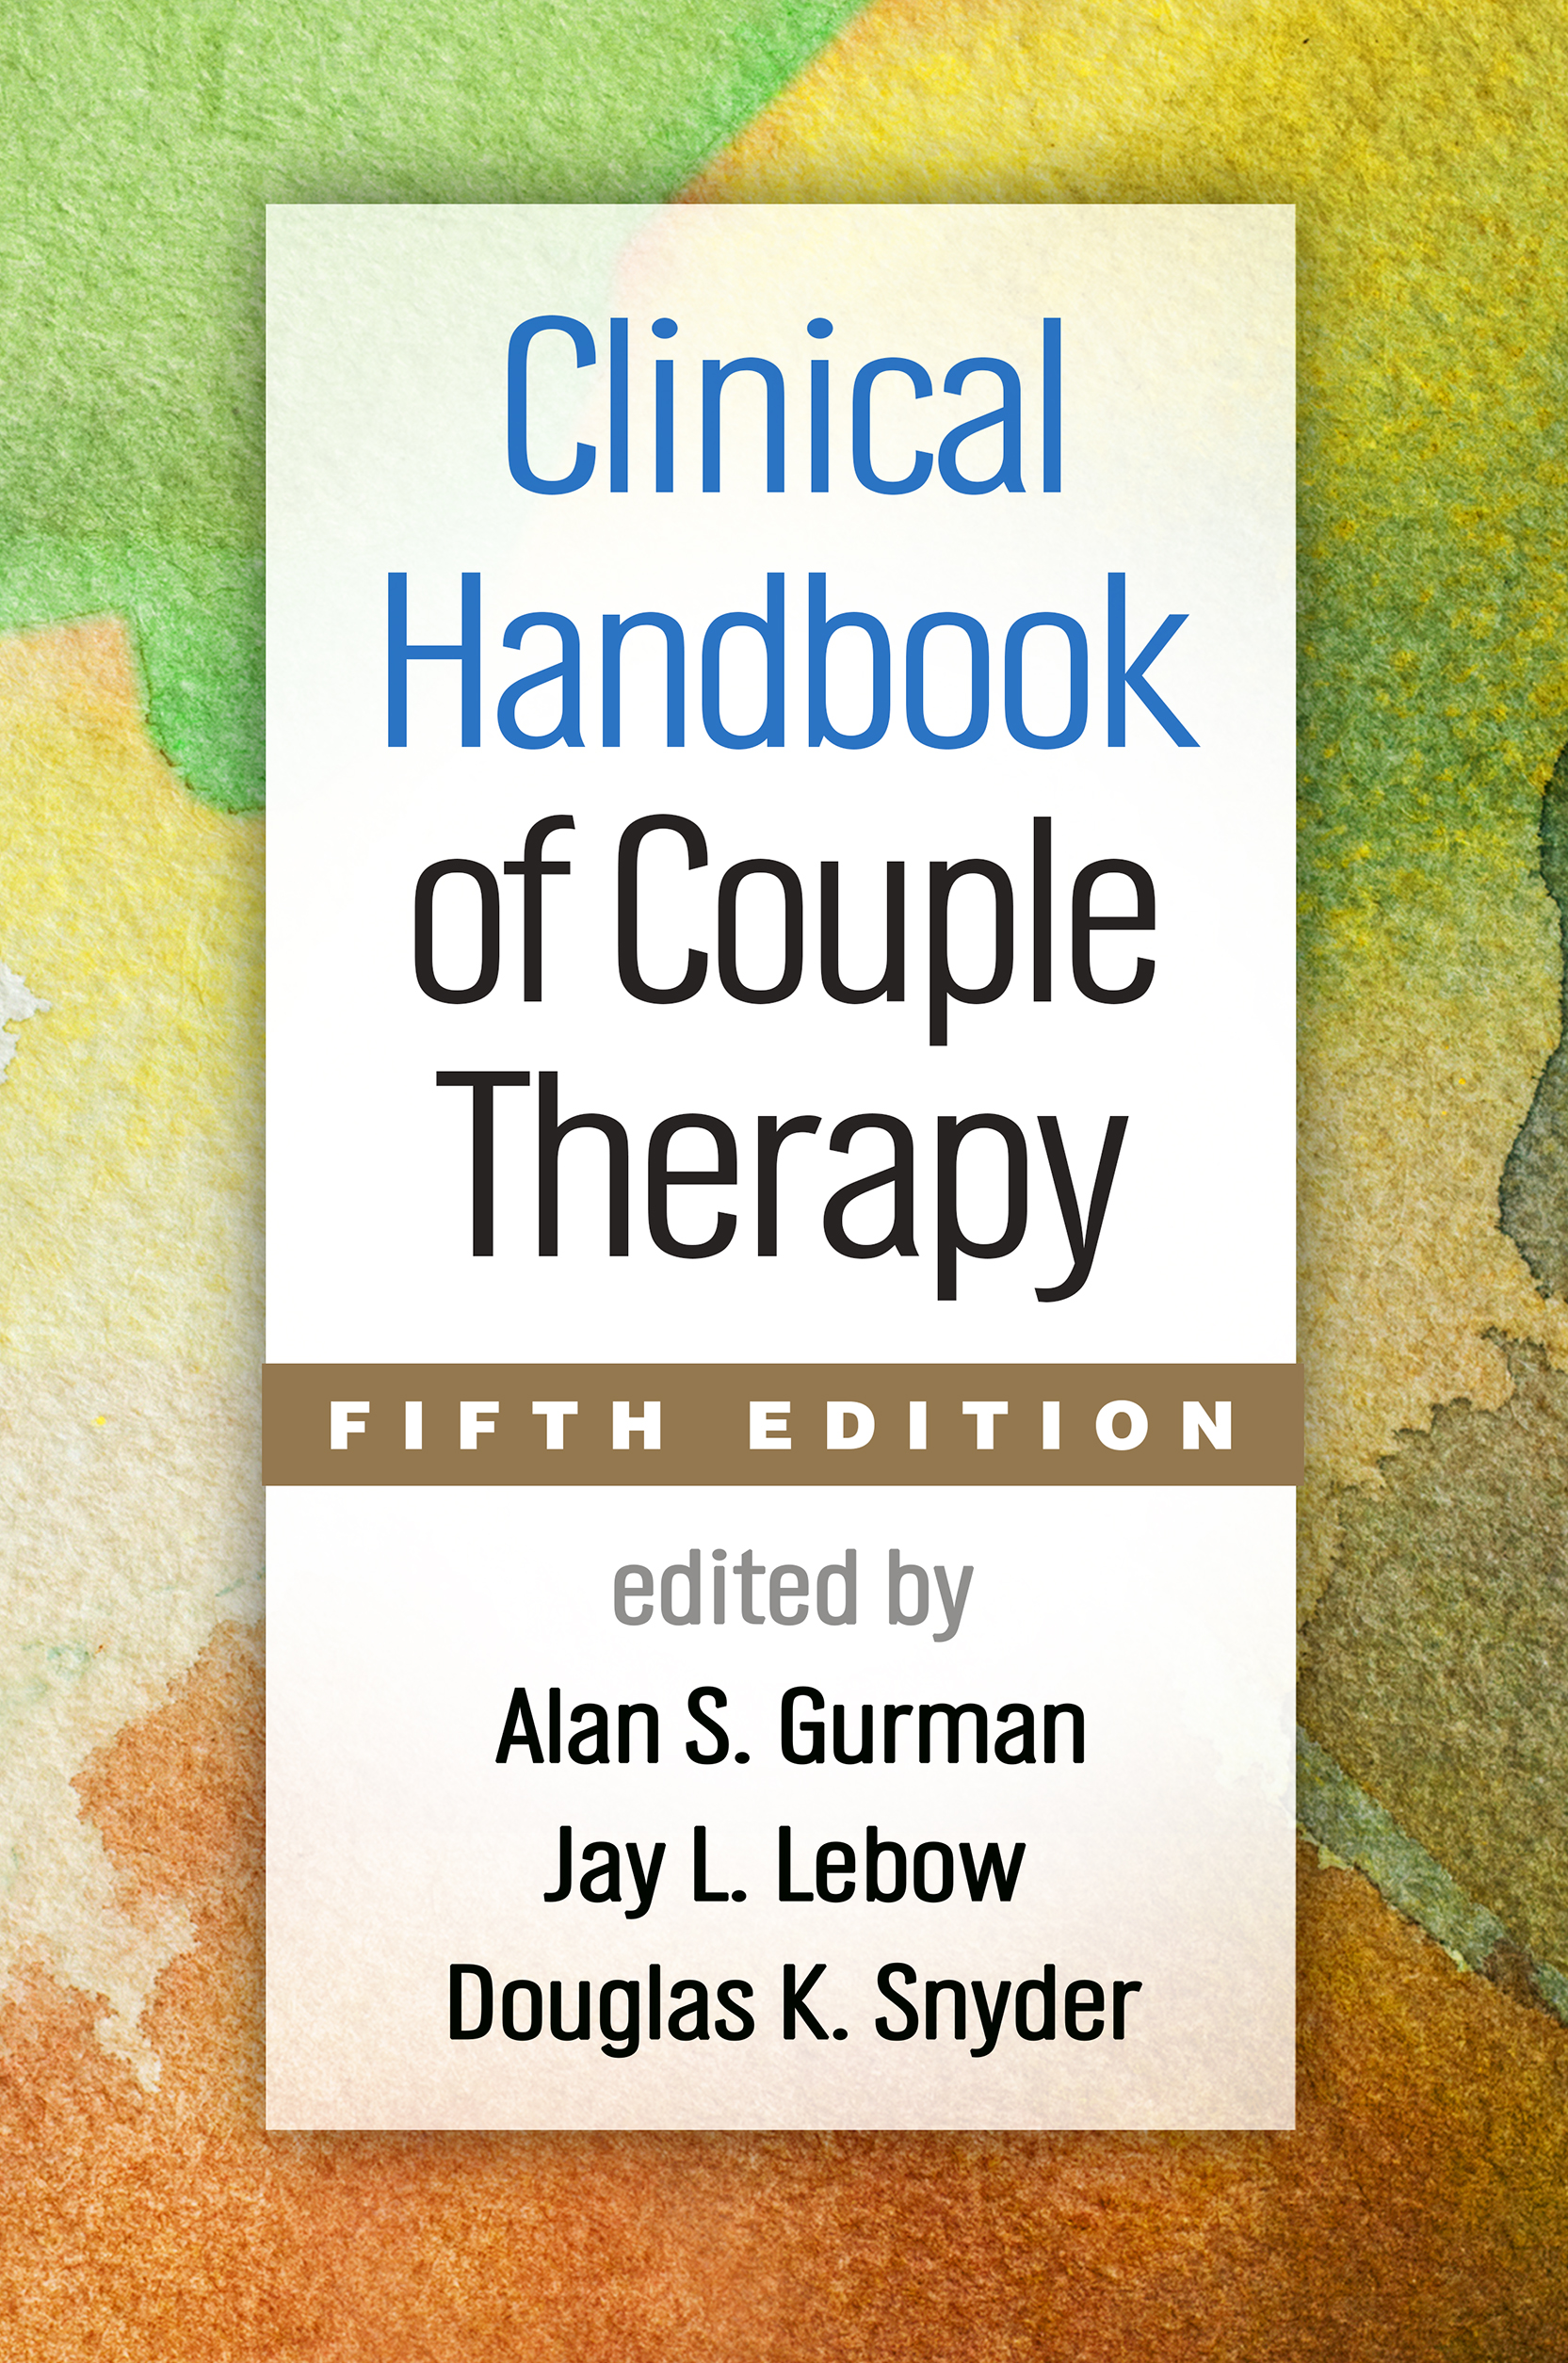 Clinical Handbook of Couple Therapy, Fifth Edition